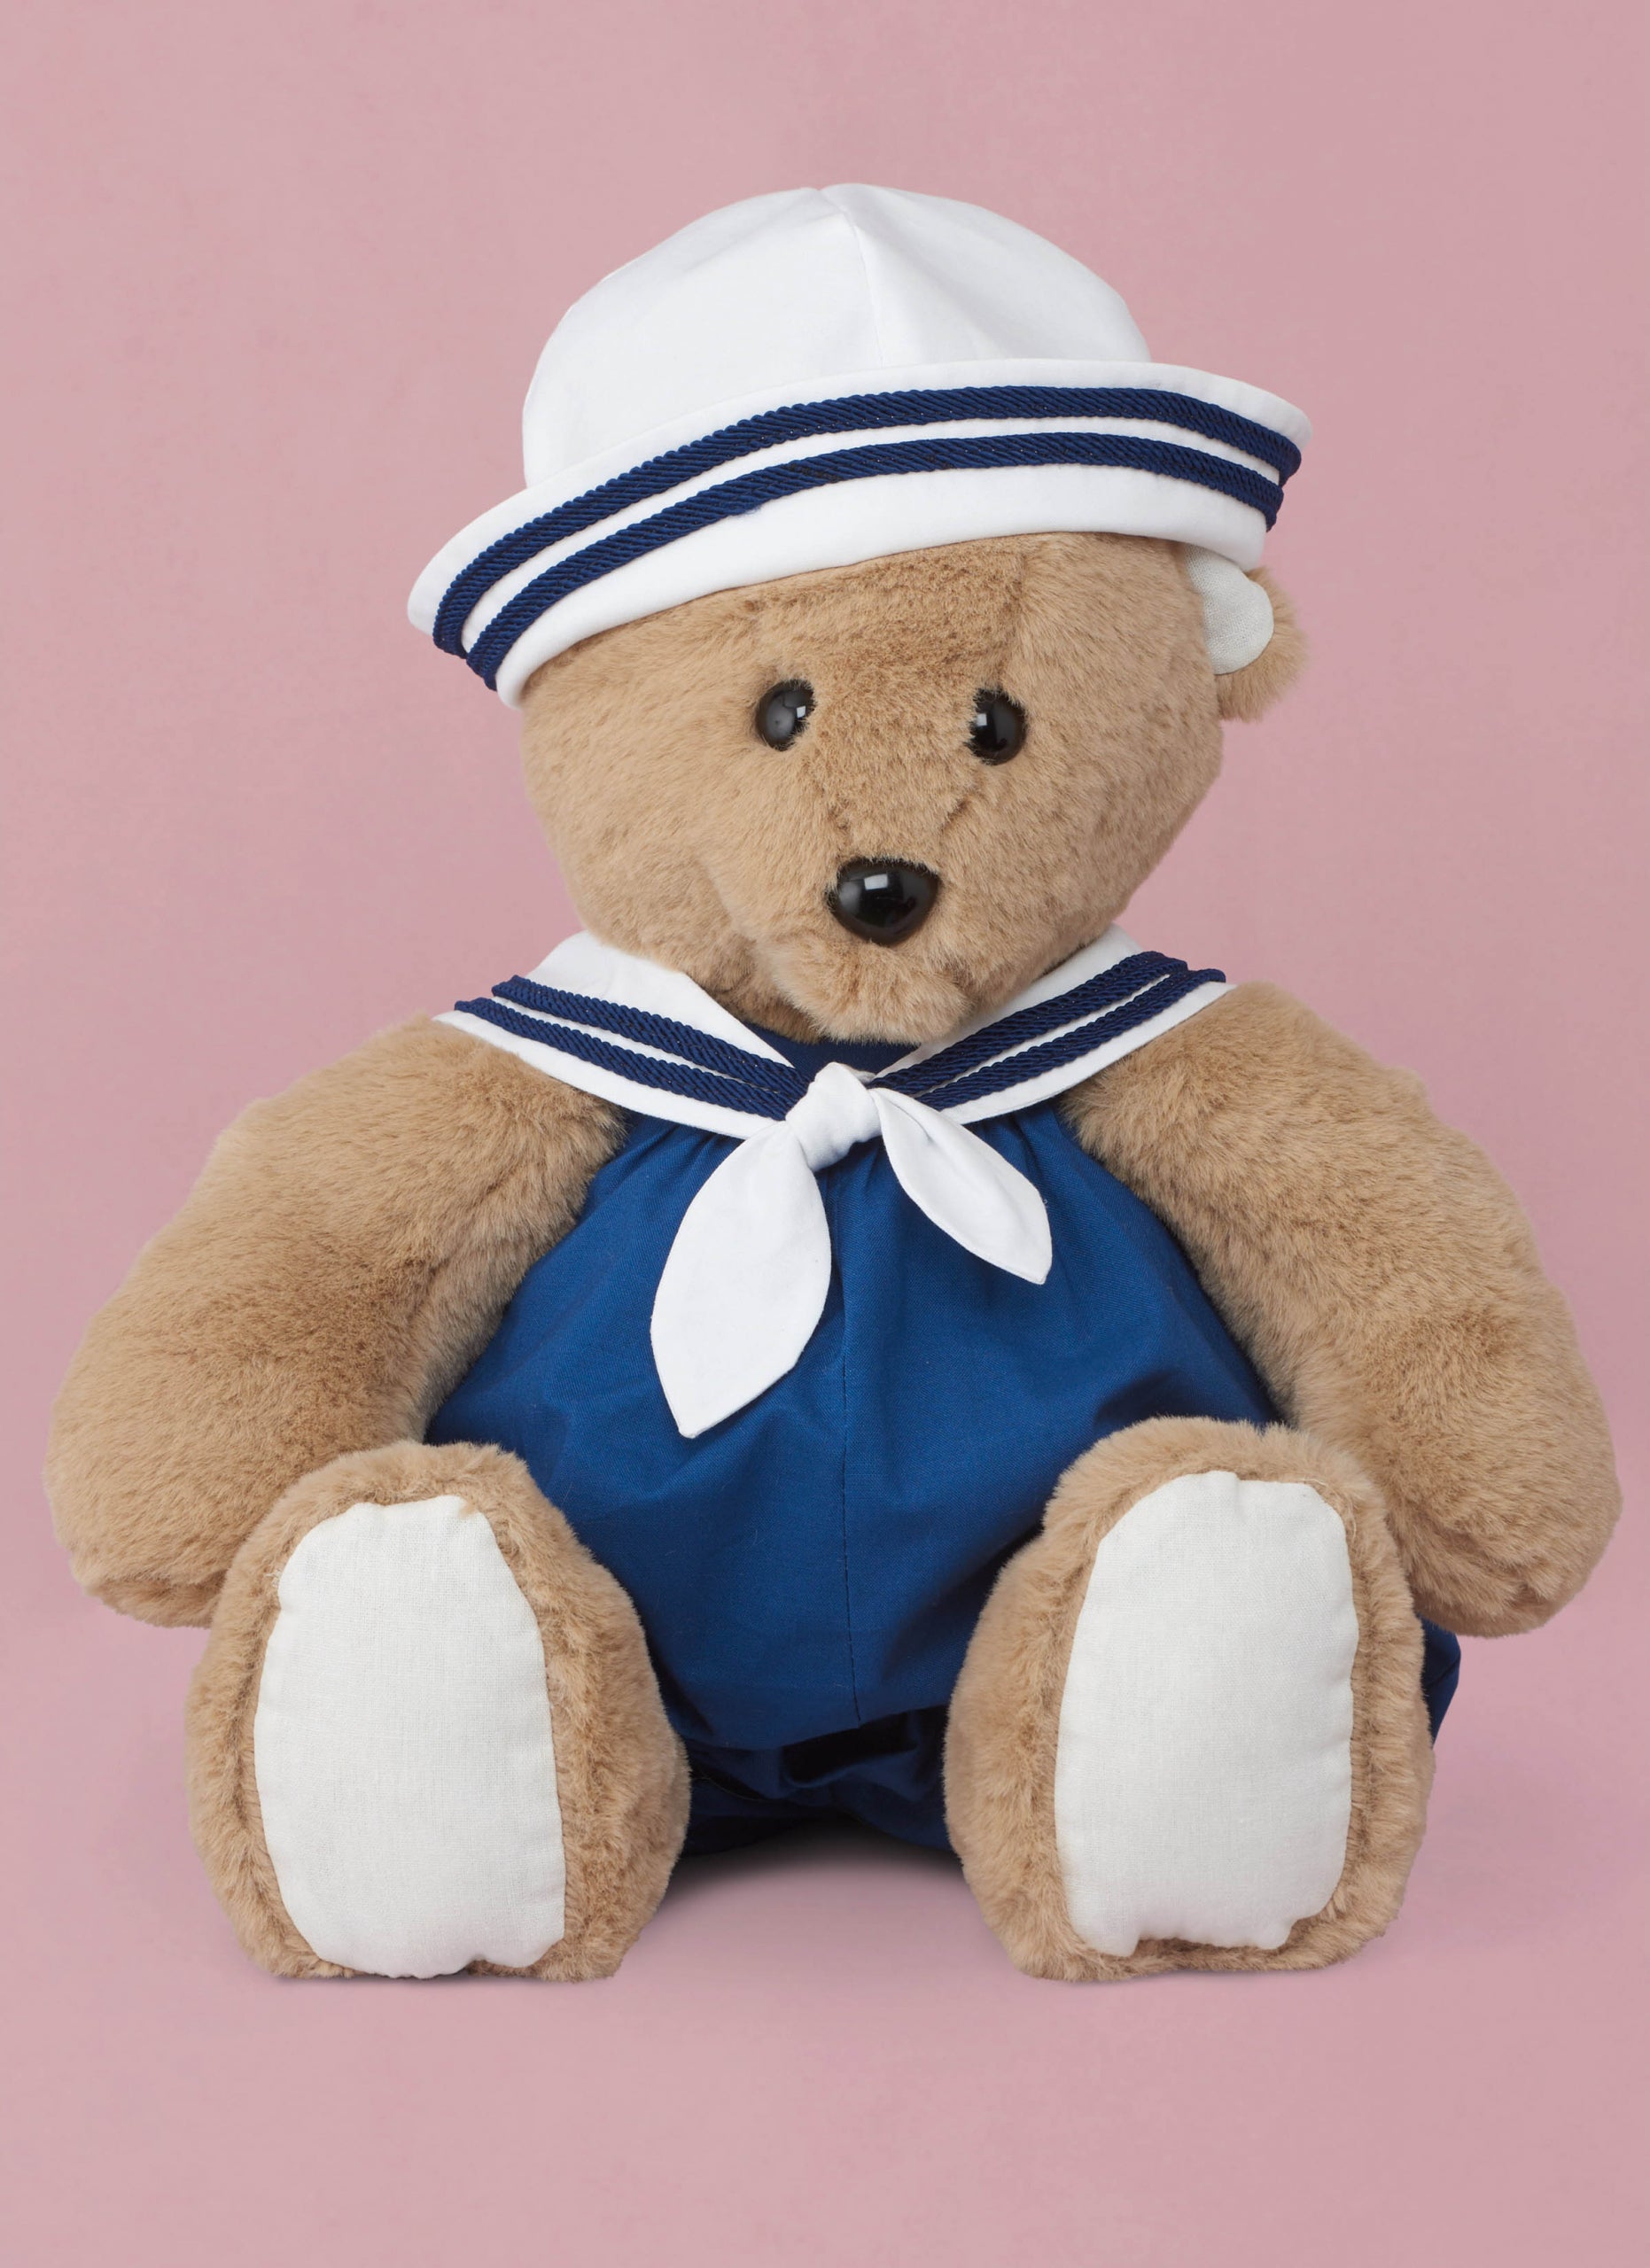 Simplicity 9771 Sewing Pattern for Plush Bear with Clothes and Hats from Jaycotts Sewing Supplies